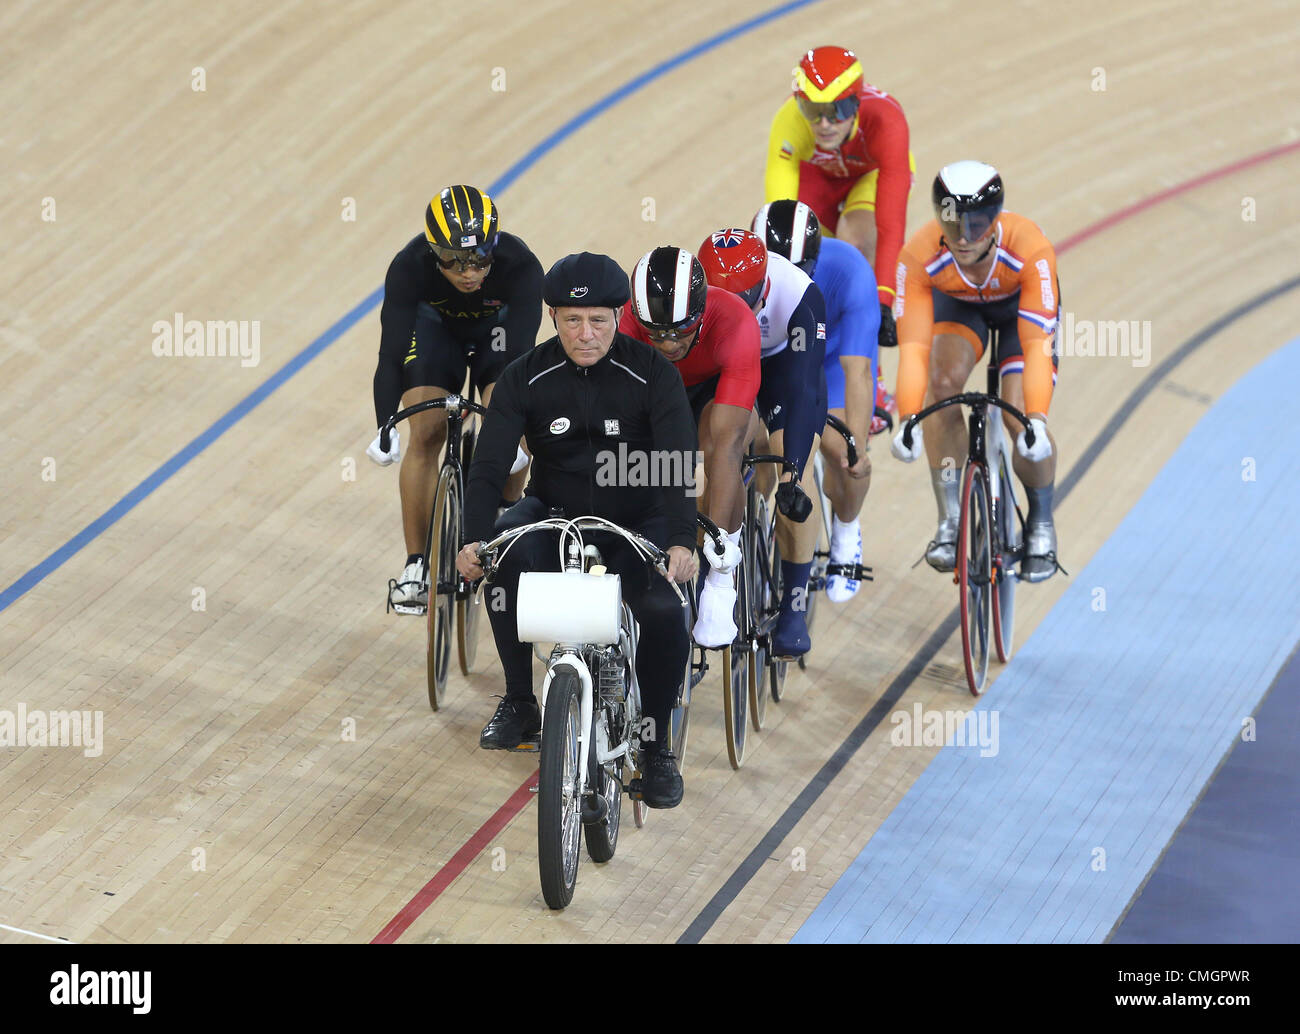 RIDERS BEHIND THE MOTORIZED PA MENS KEIRIN STRATFORD LONDON ENGLAND 07 August 2012 Stock Photo